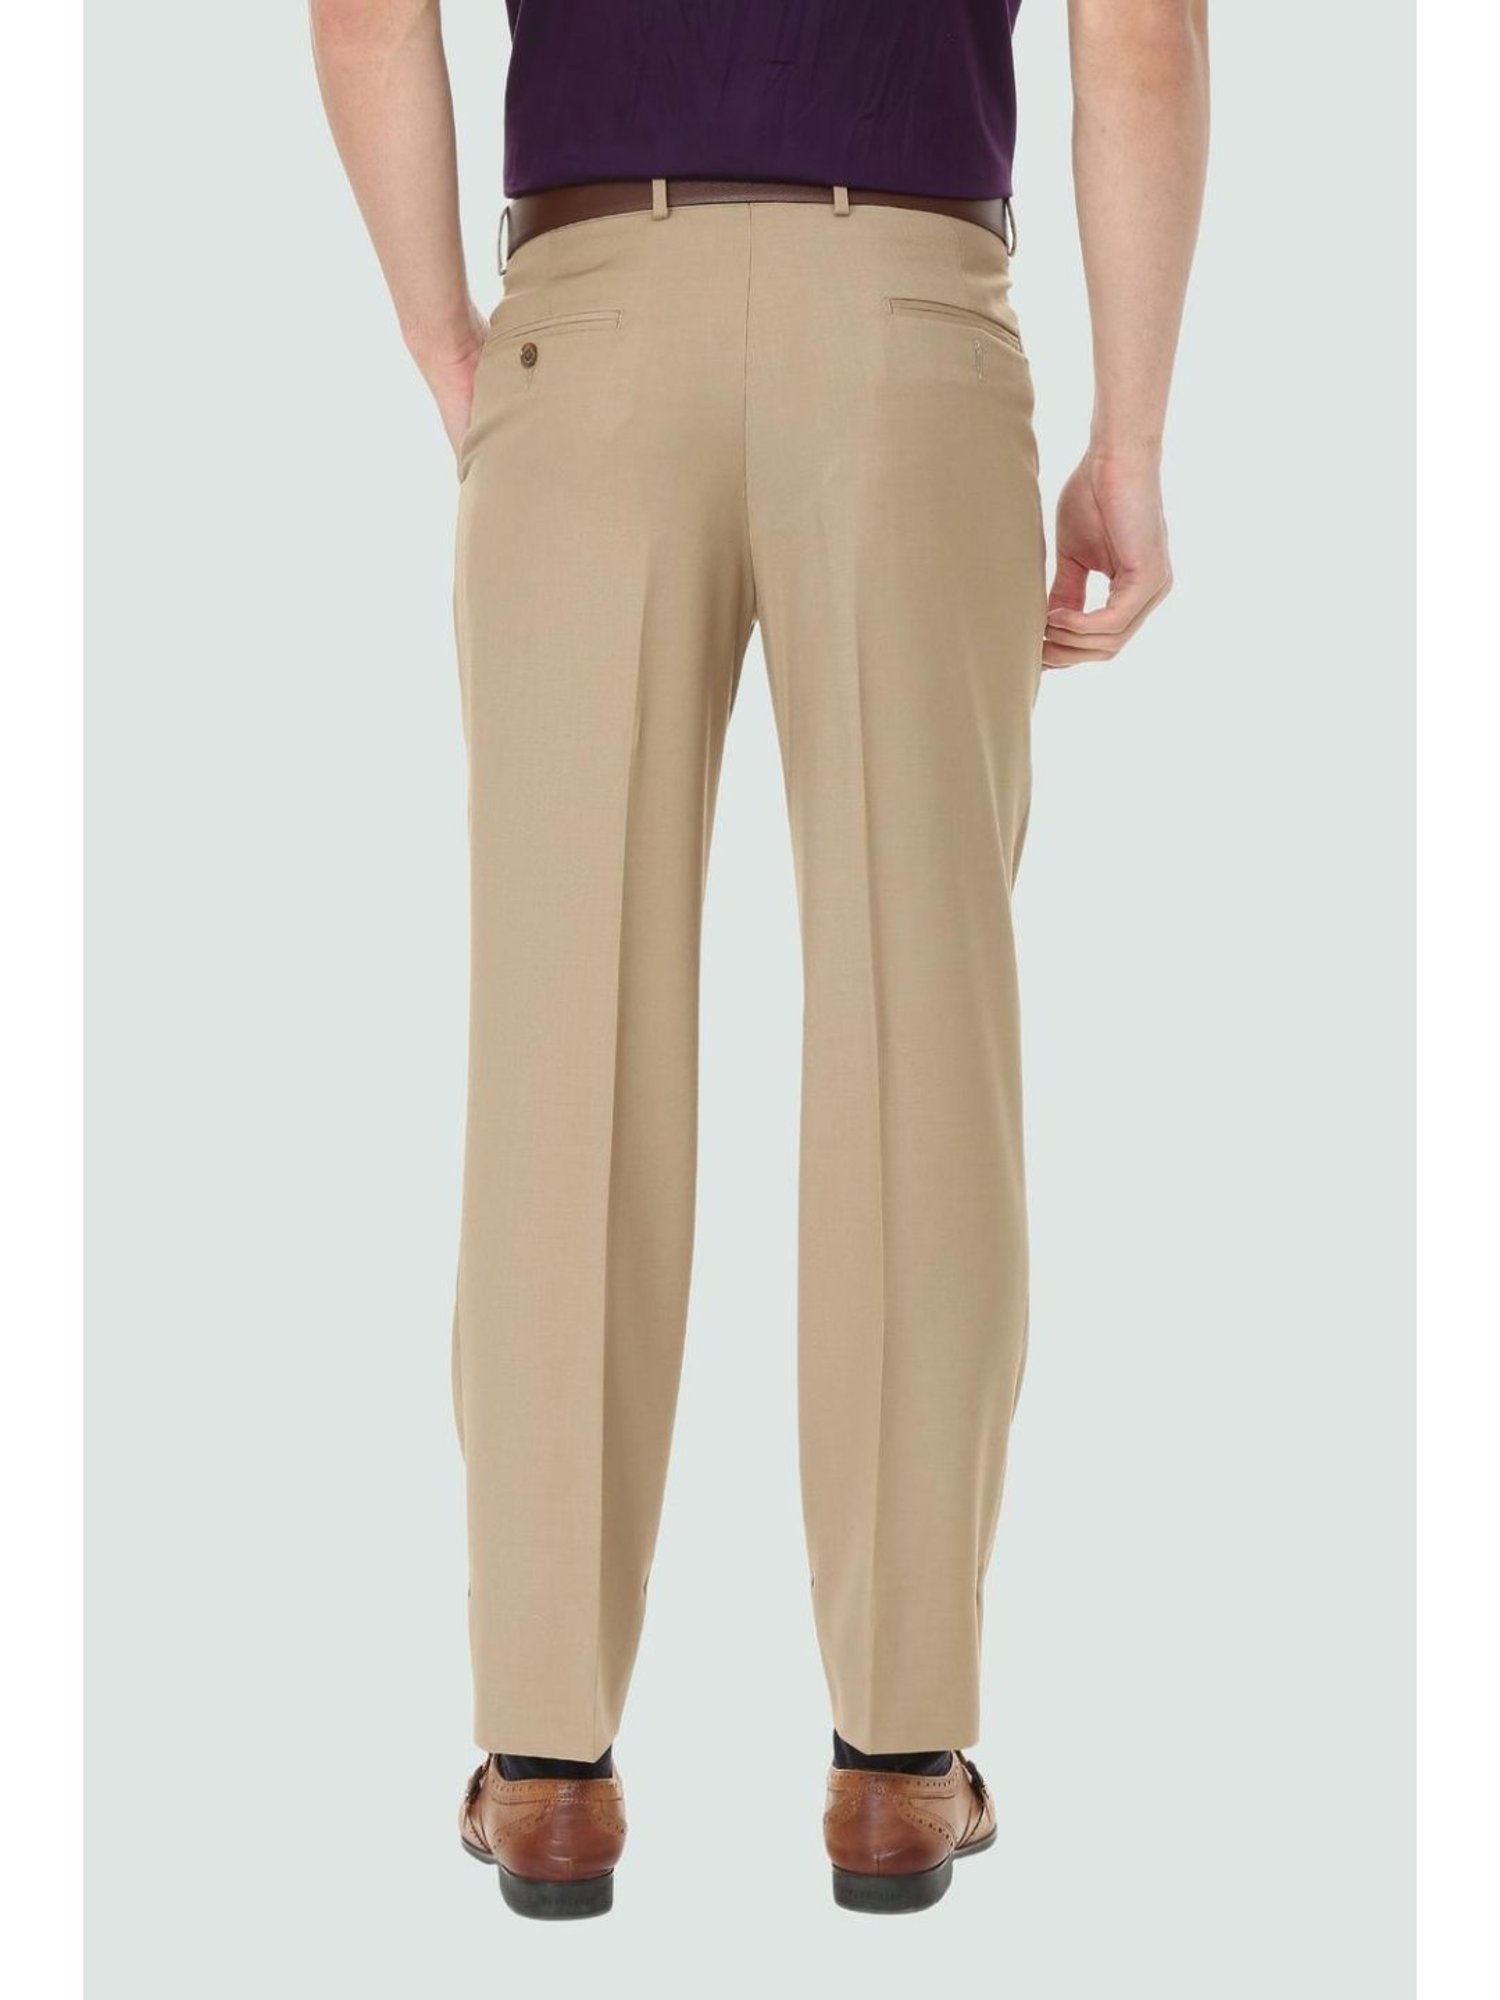 Formal Brown Pleated Trouser for mens  Plus Size Pants Big Size Trouser   Regular Fit  Size  36  38 40  42